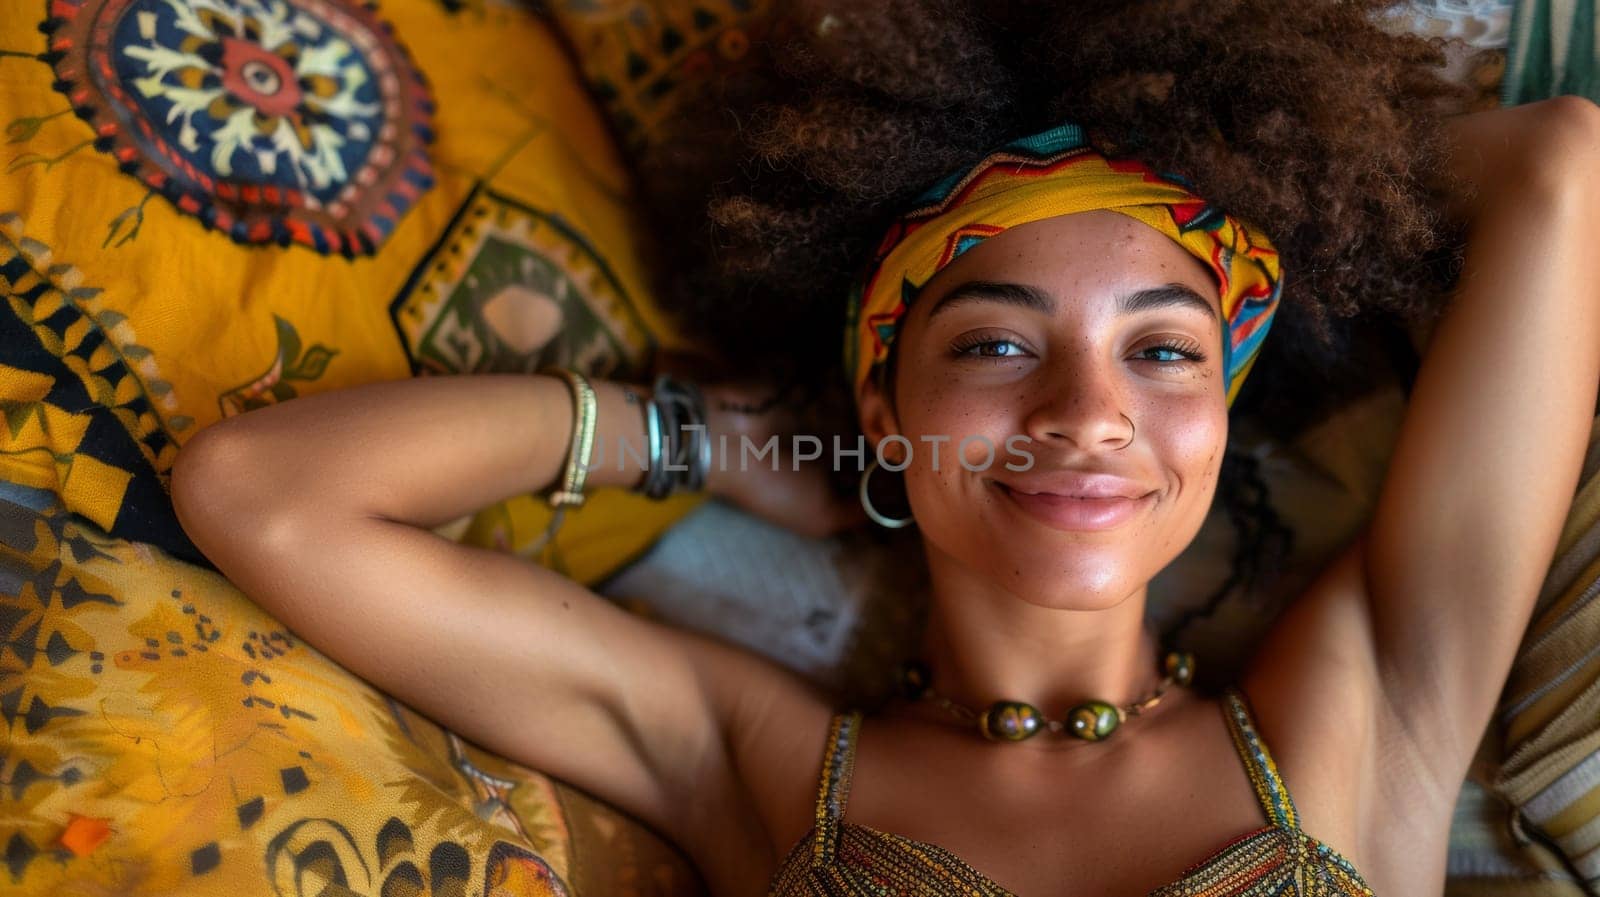 A woman with afro hair laying on a bed smiling